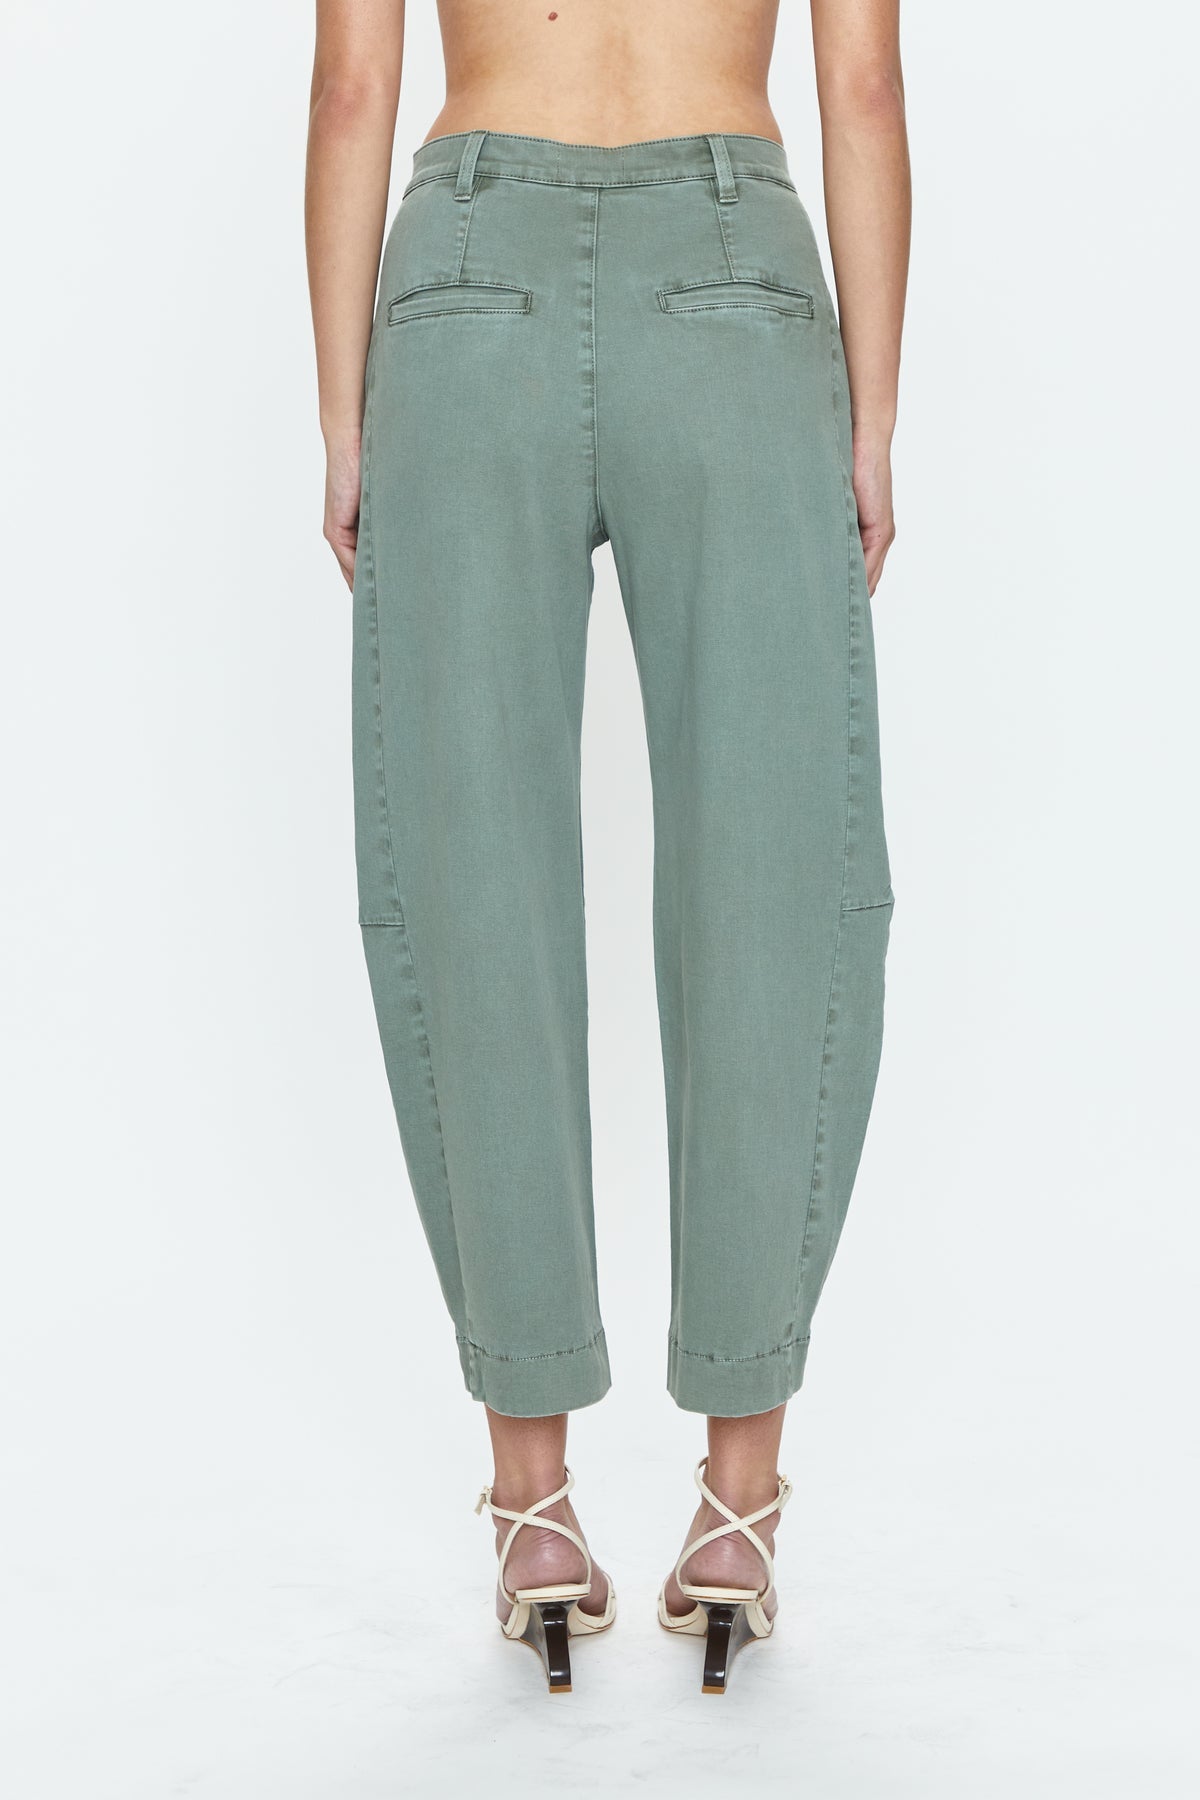 Pistola - Women - Calvary Olive Eli High Rise Arched Trouser